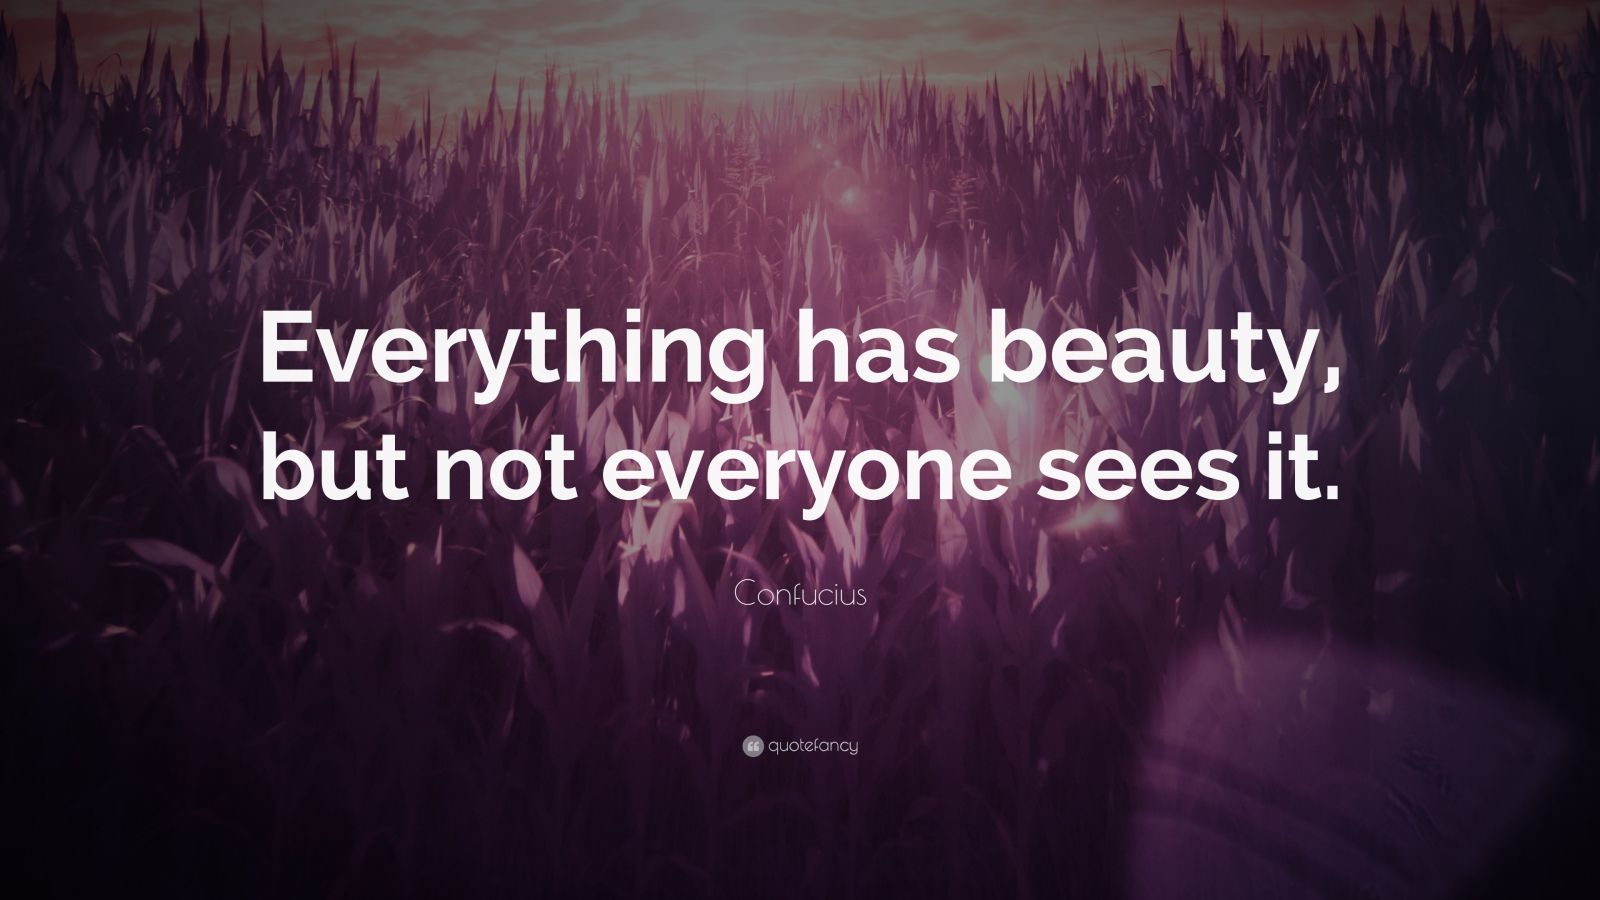 Confucius Quote: “Everything has beauty, but not everyone sees it.” (26 ...